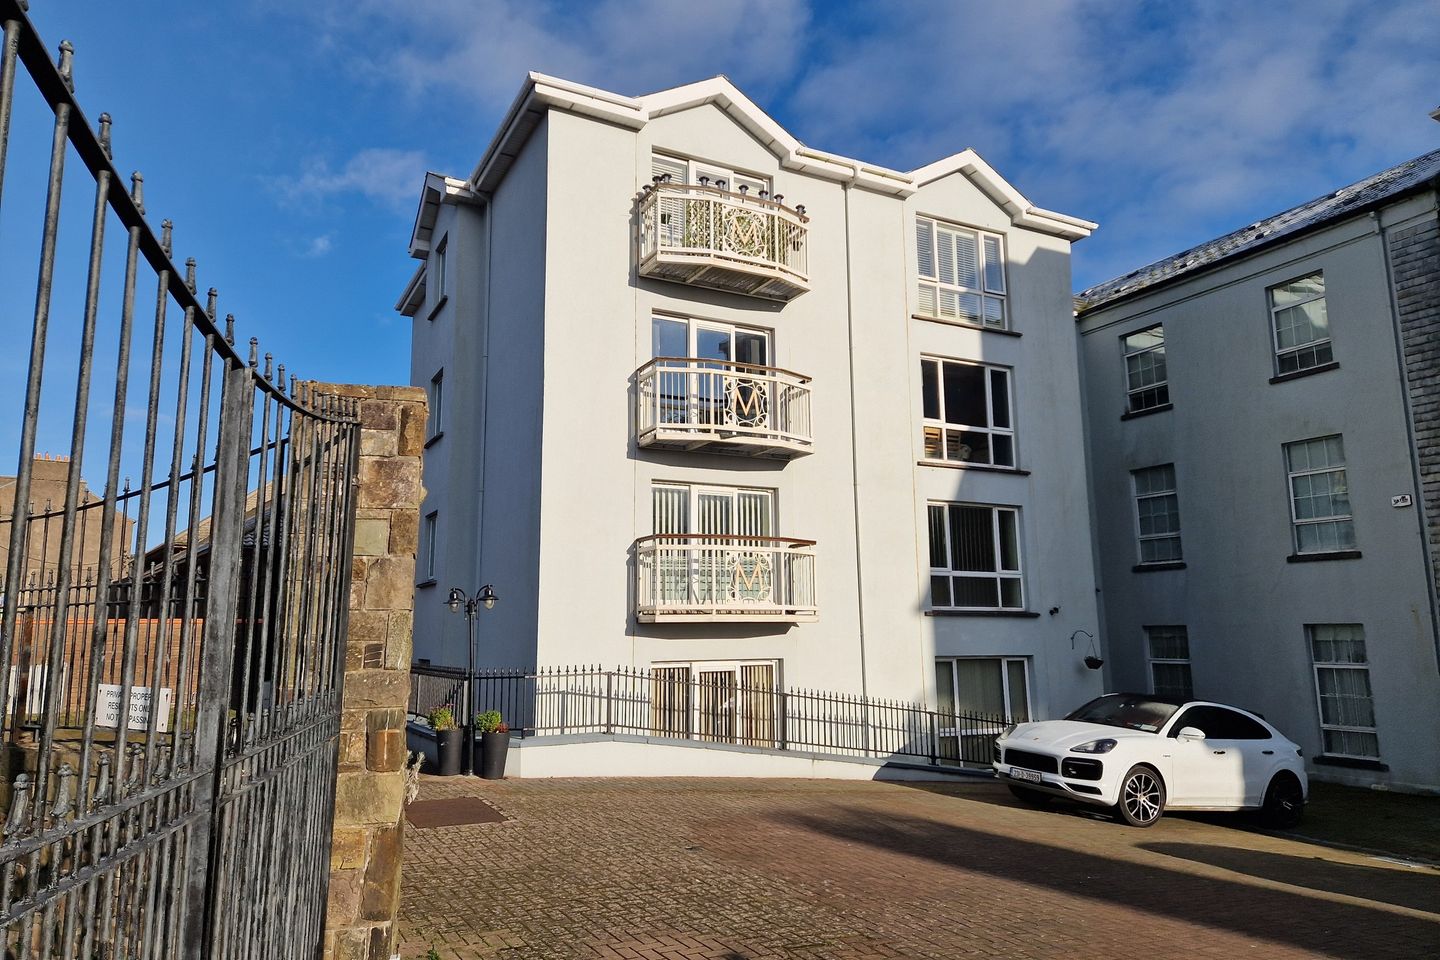 Apartment 7, The Monastery, Youghal, Co. Cork, P36YV74